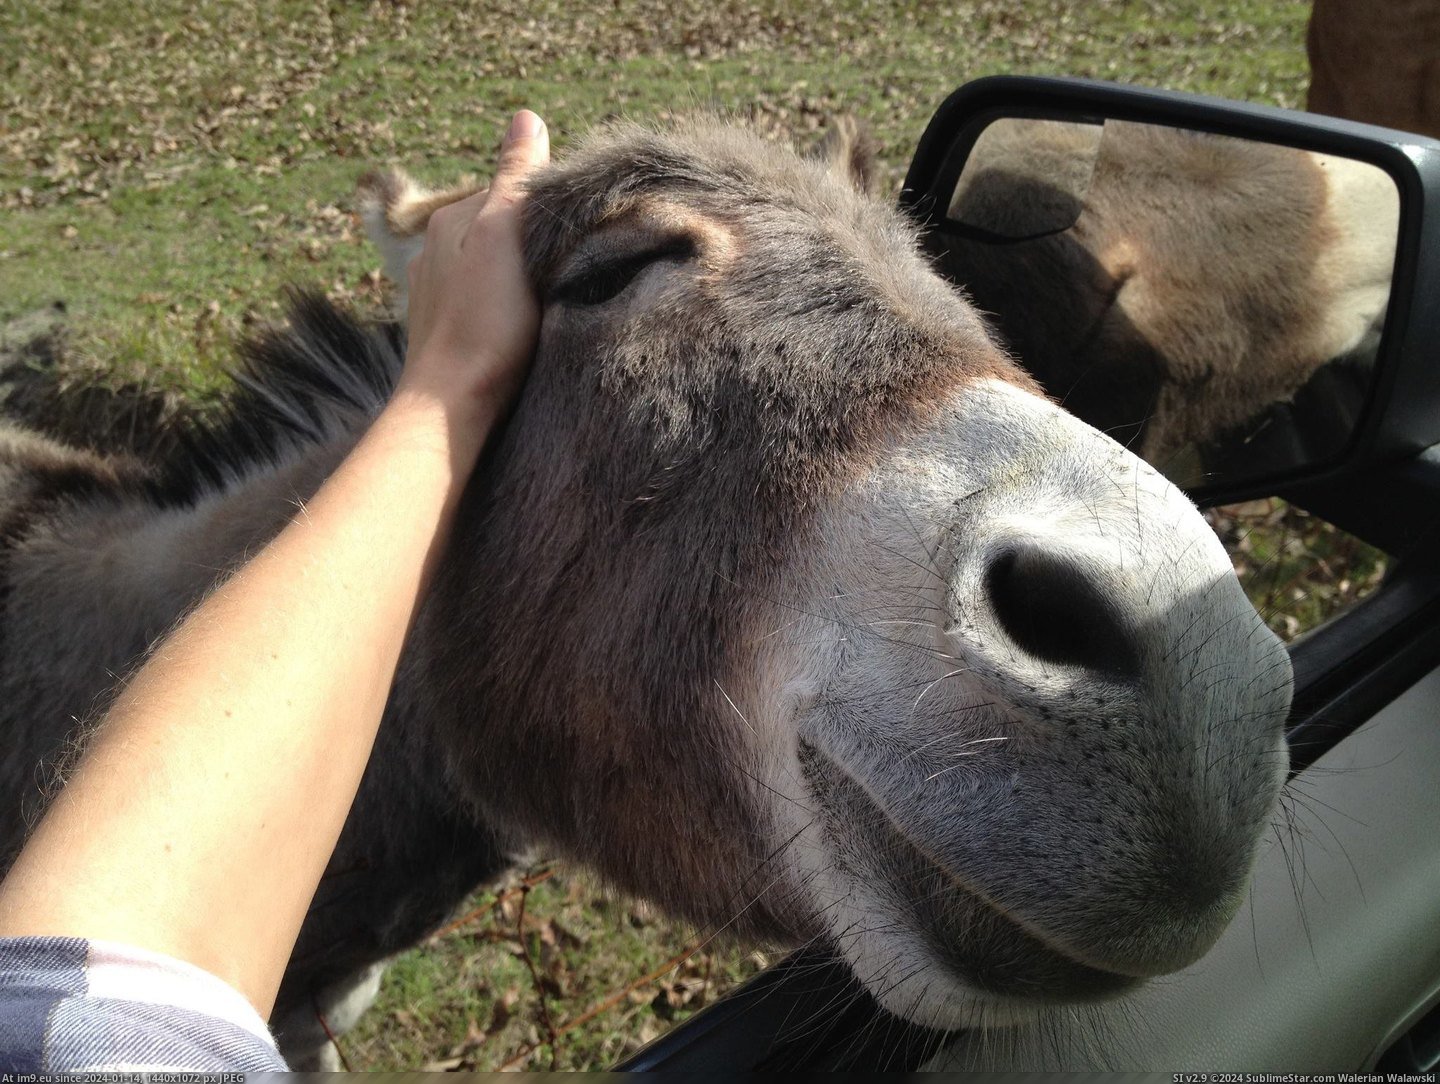 #Funny #Head #Mini #Scratch #Donkey #Neighbor #Chase #Driveway [Funny] My neighbor has a mini donkey that will chase you up the driveway until you scratch his head. 2 Pic. (Image of album My r/FUNNY favs))